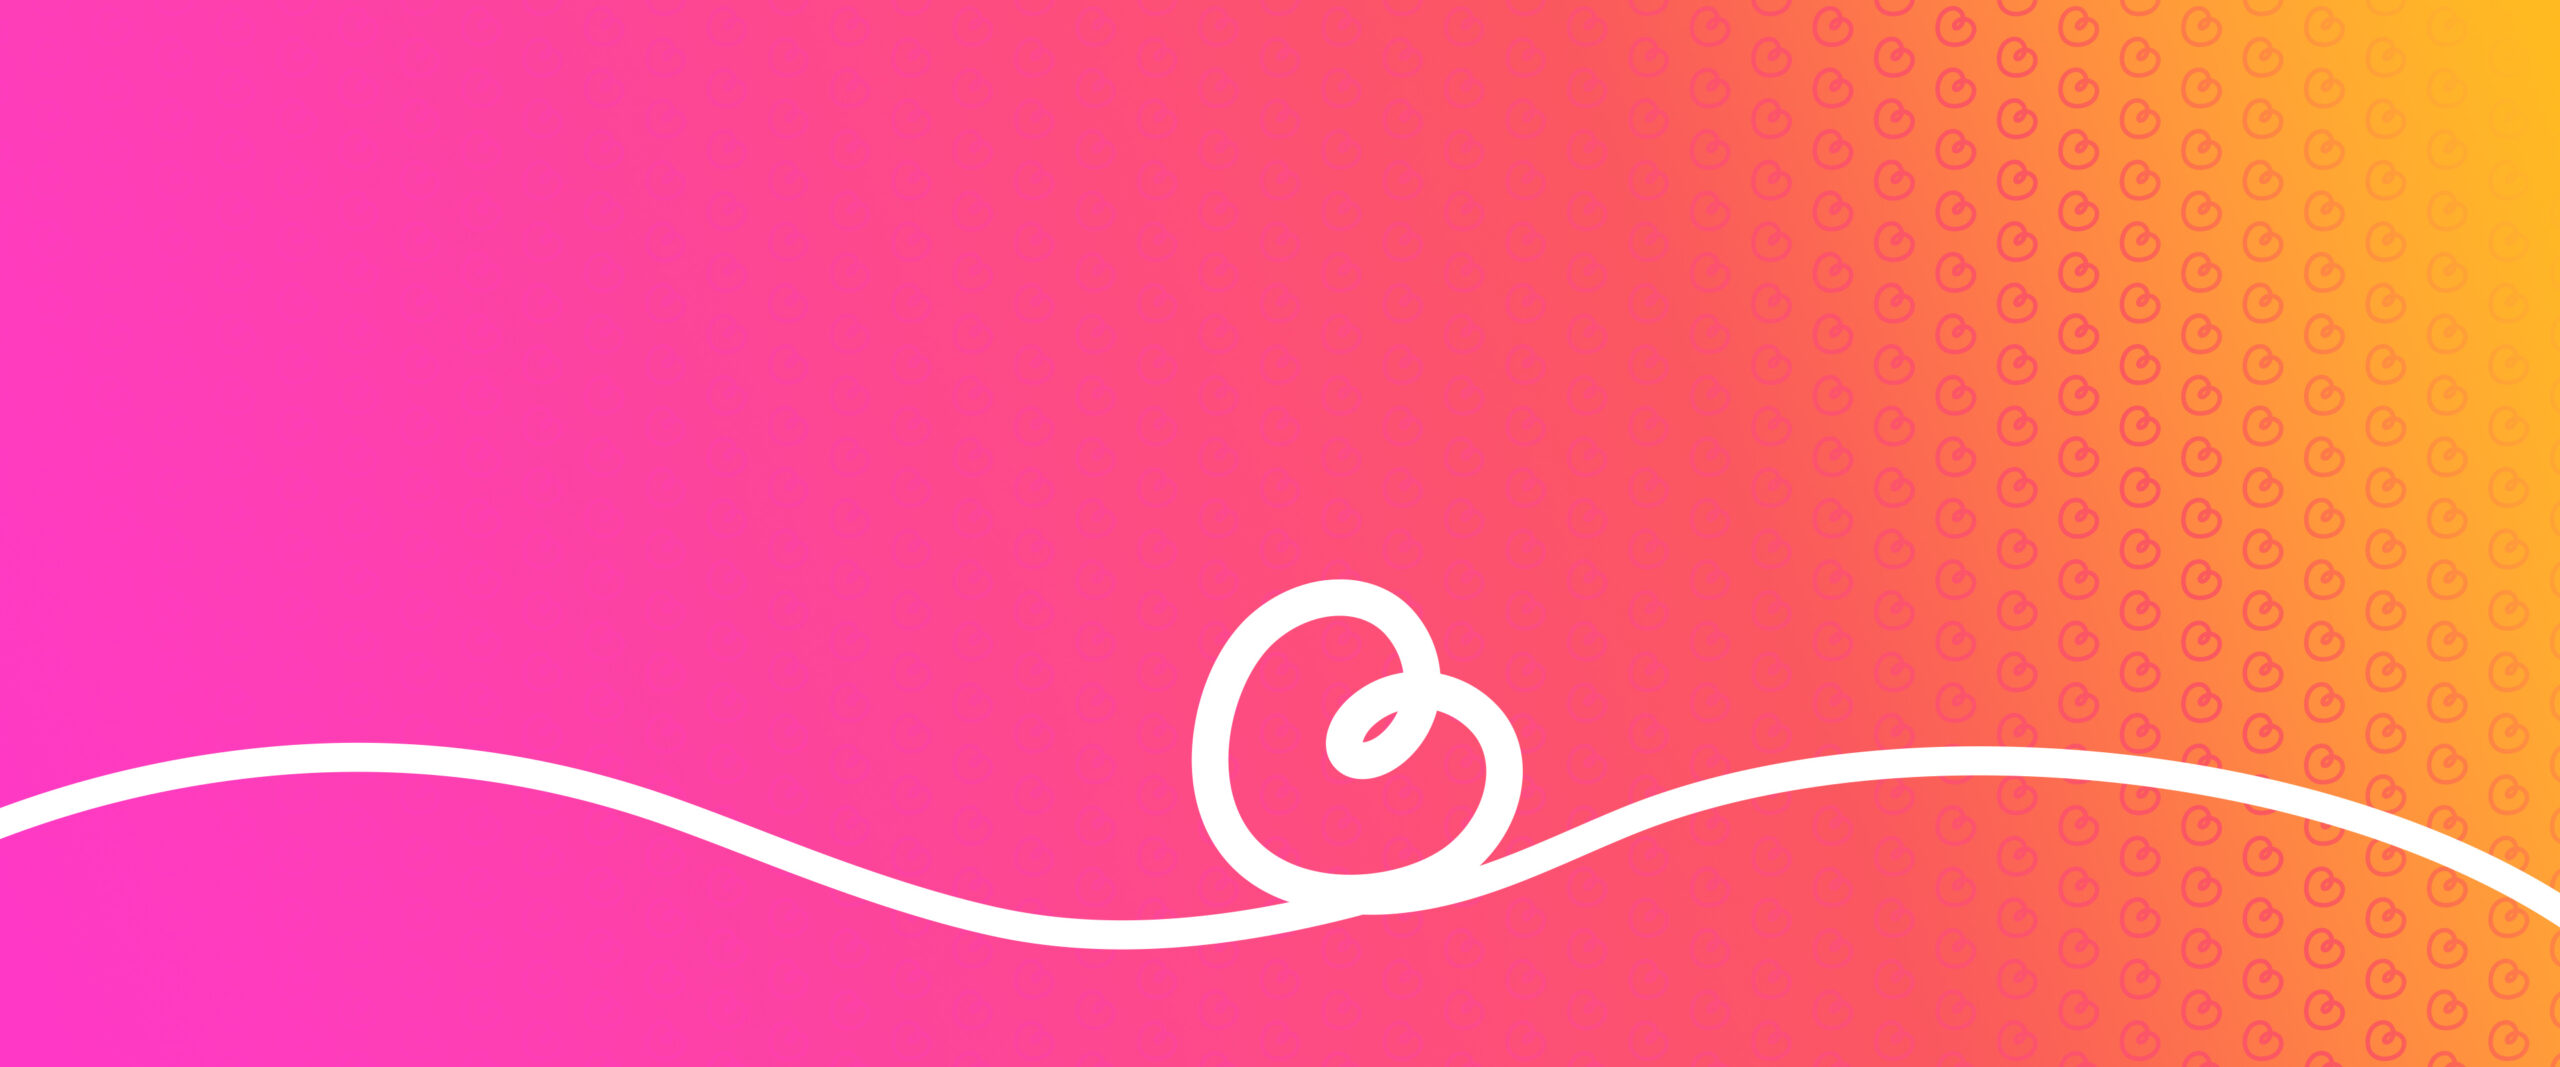 Orange-pink background with a white heart.